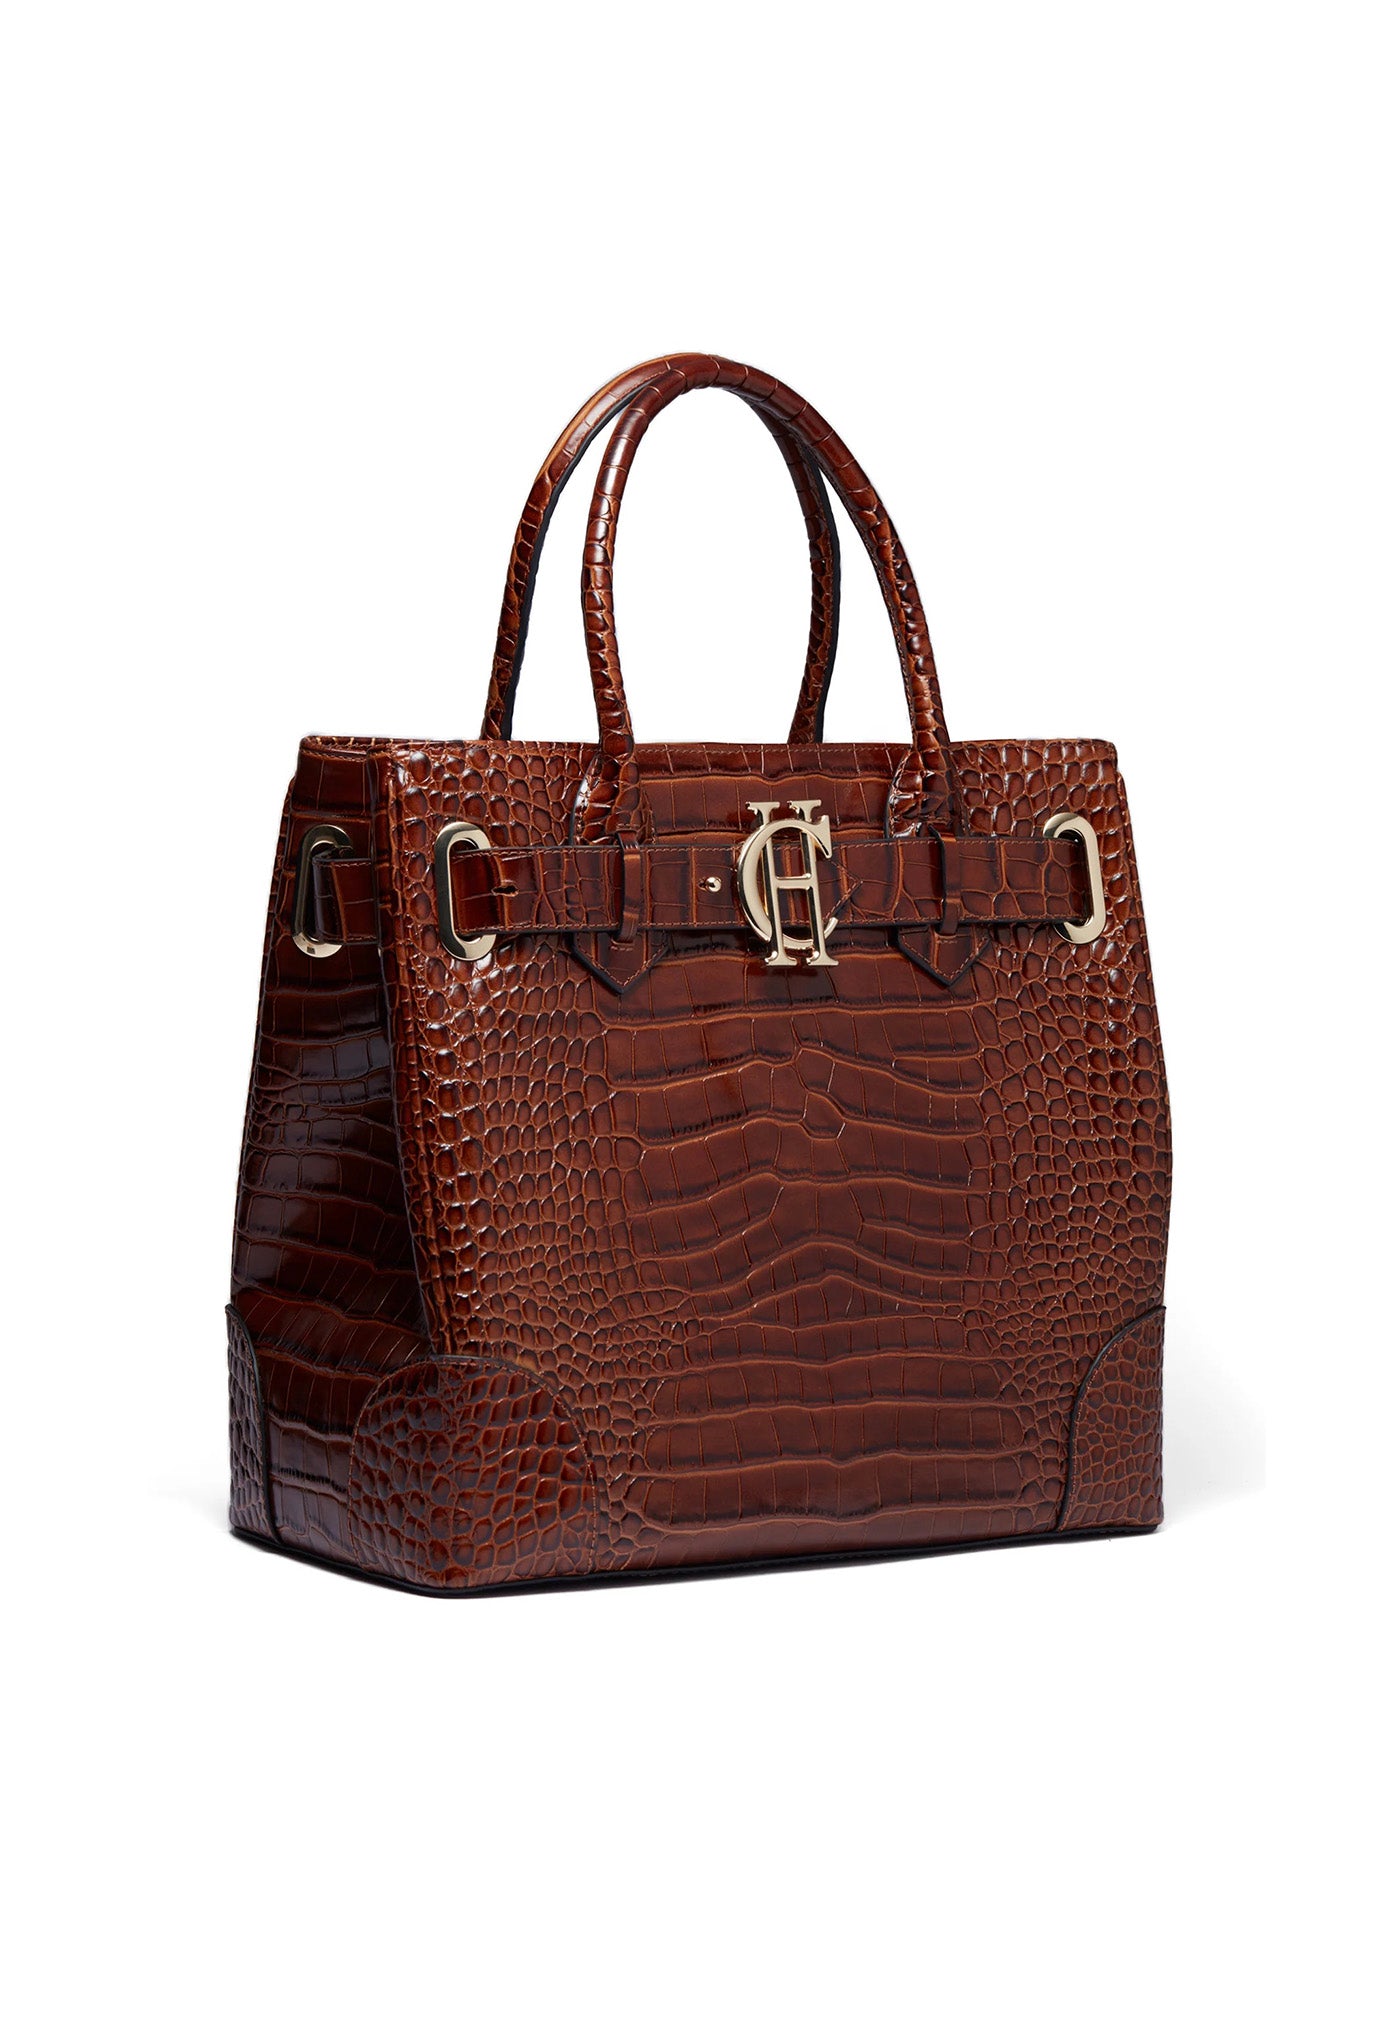 The Brompton Tote - Tan Croc sold by Angel Divine